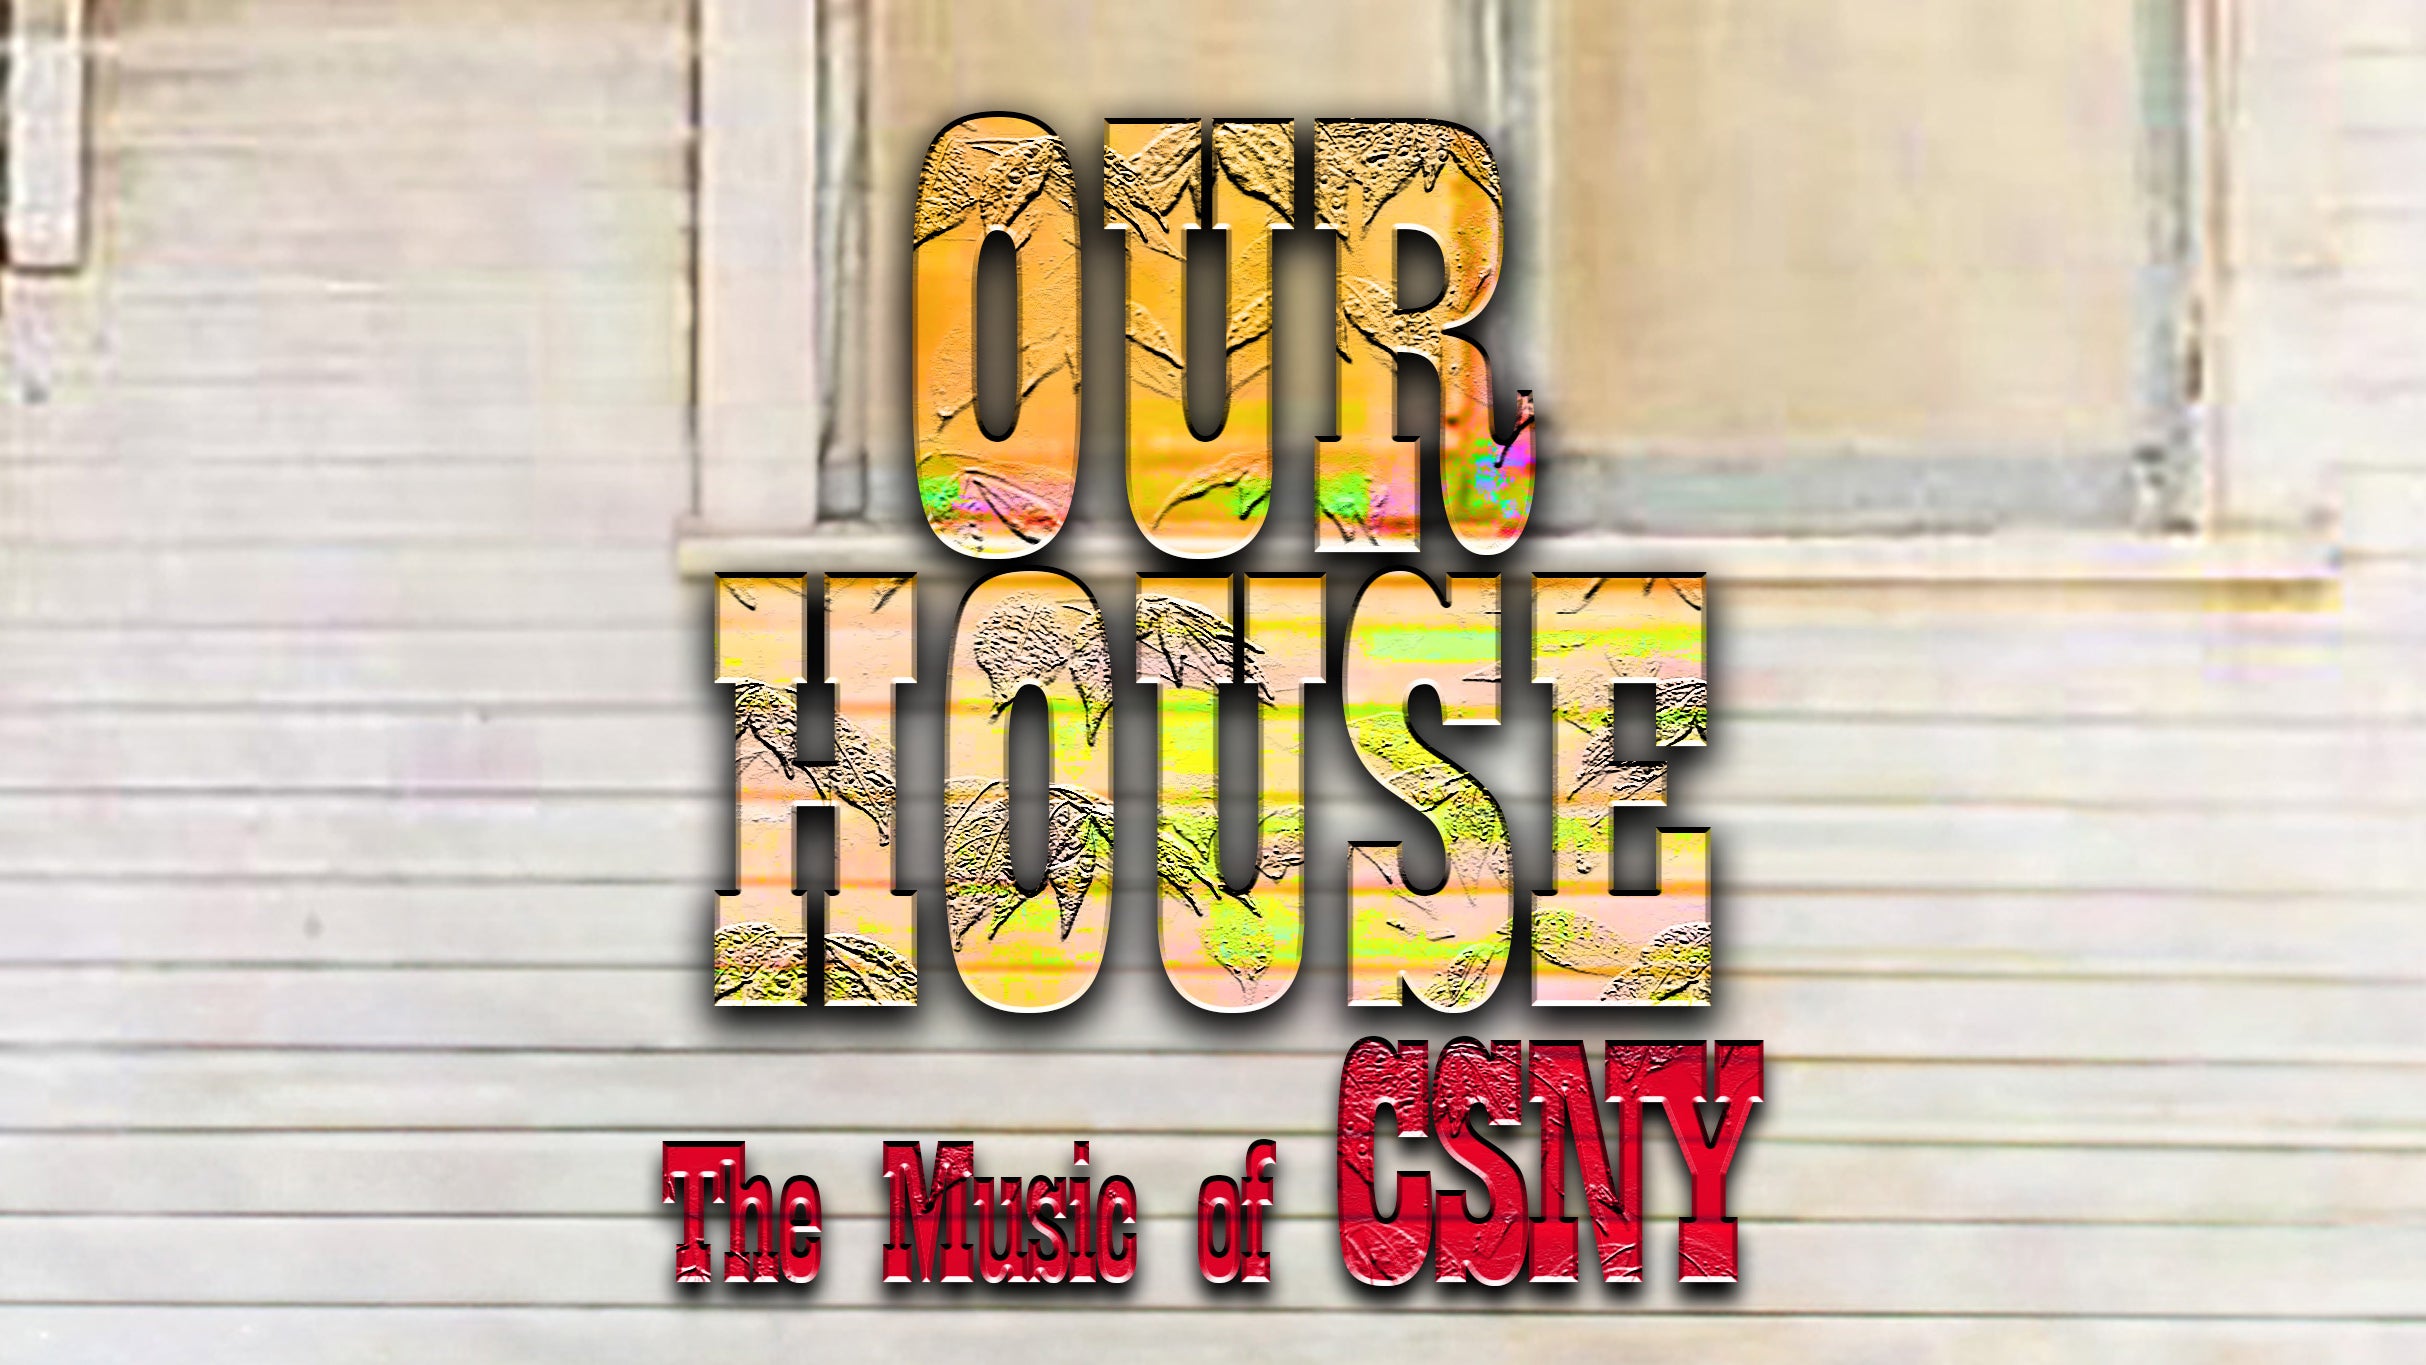 Our House: The Music Of Crosby, Stills, Nash & Young in Bethel promo photo for Ticketmaster presale offer code